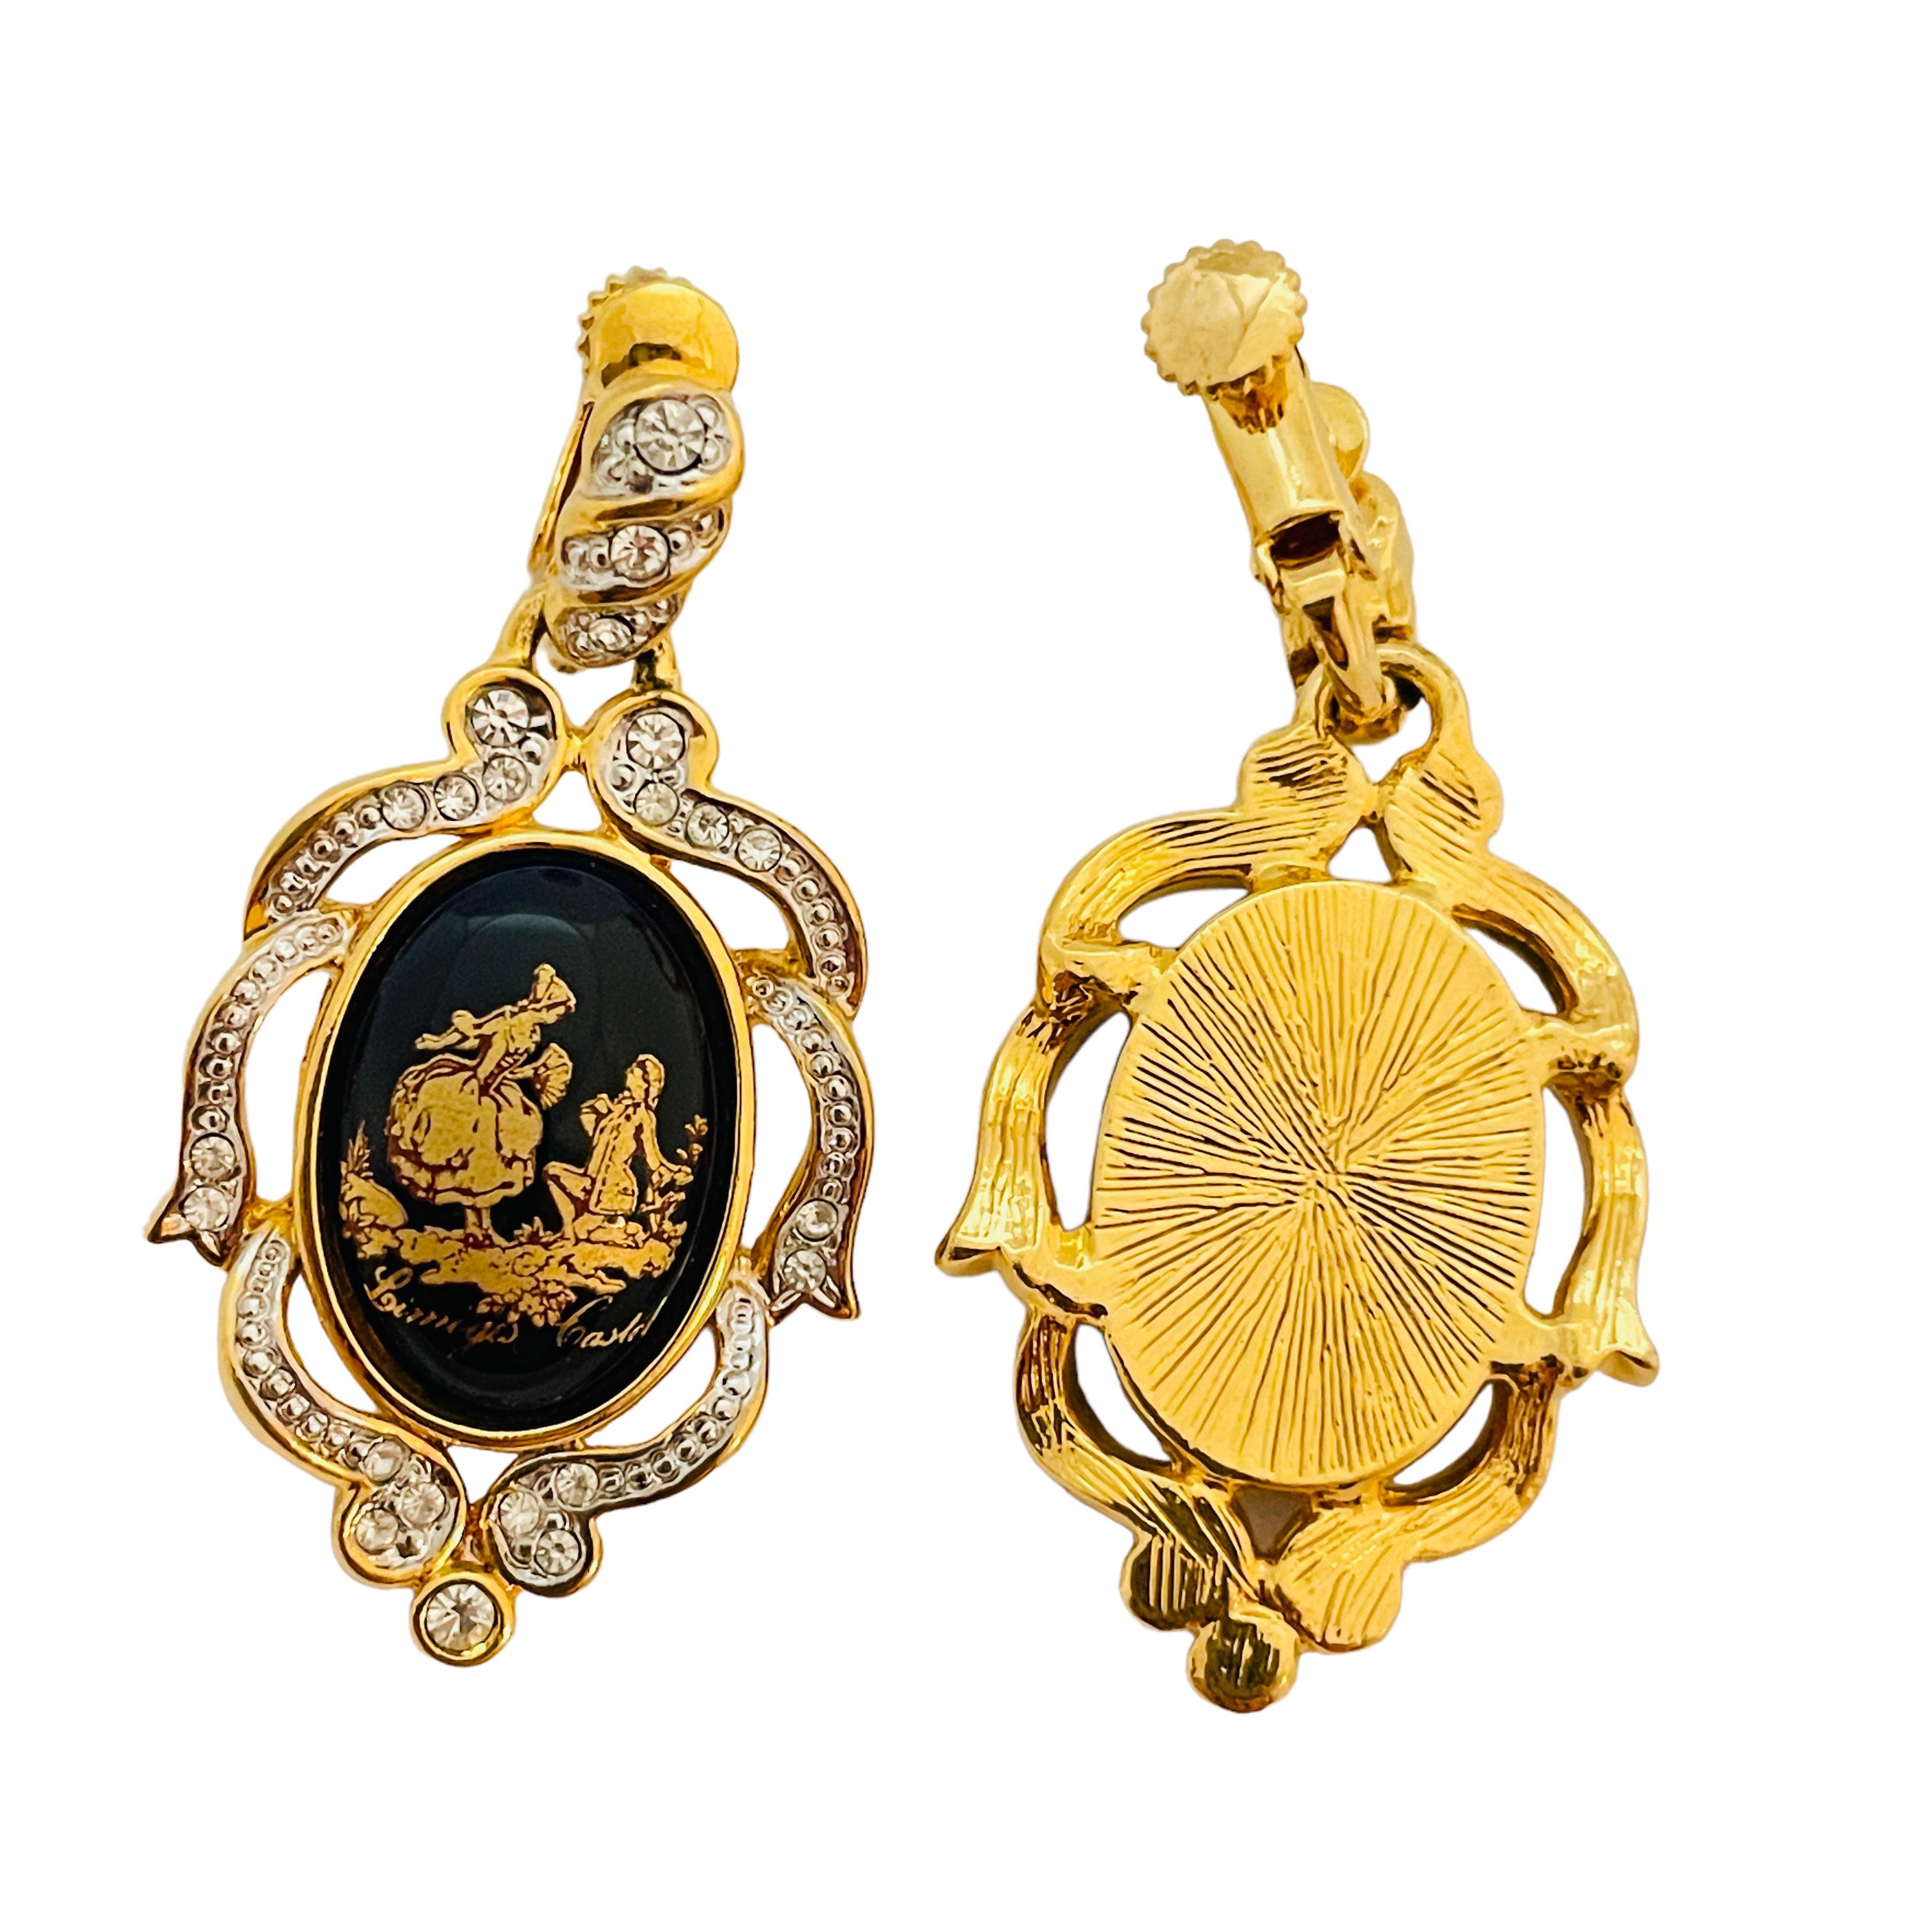 Vintage gold cameo enamel rhinestones designer clip on earrings In Good Condition For Sale In Palos Hills, IL